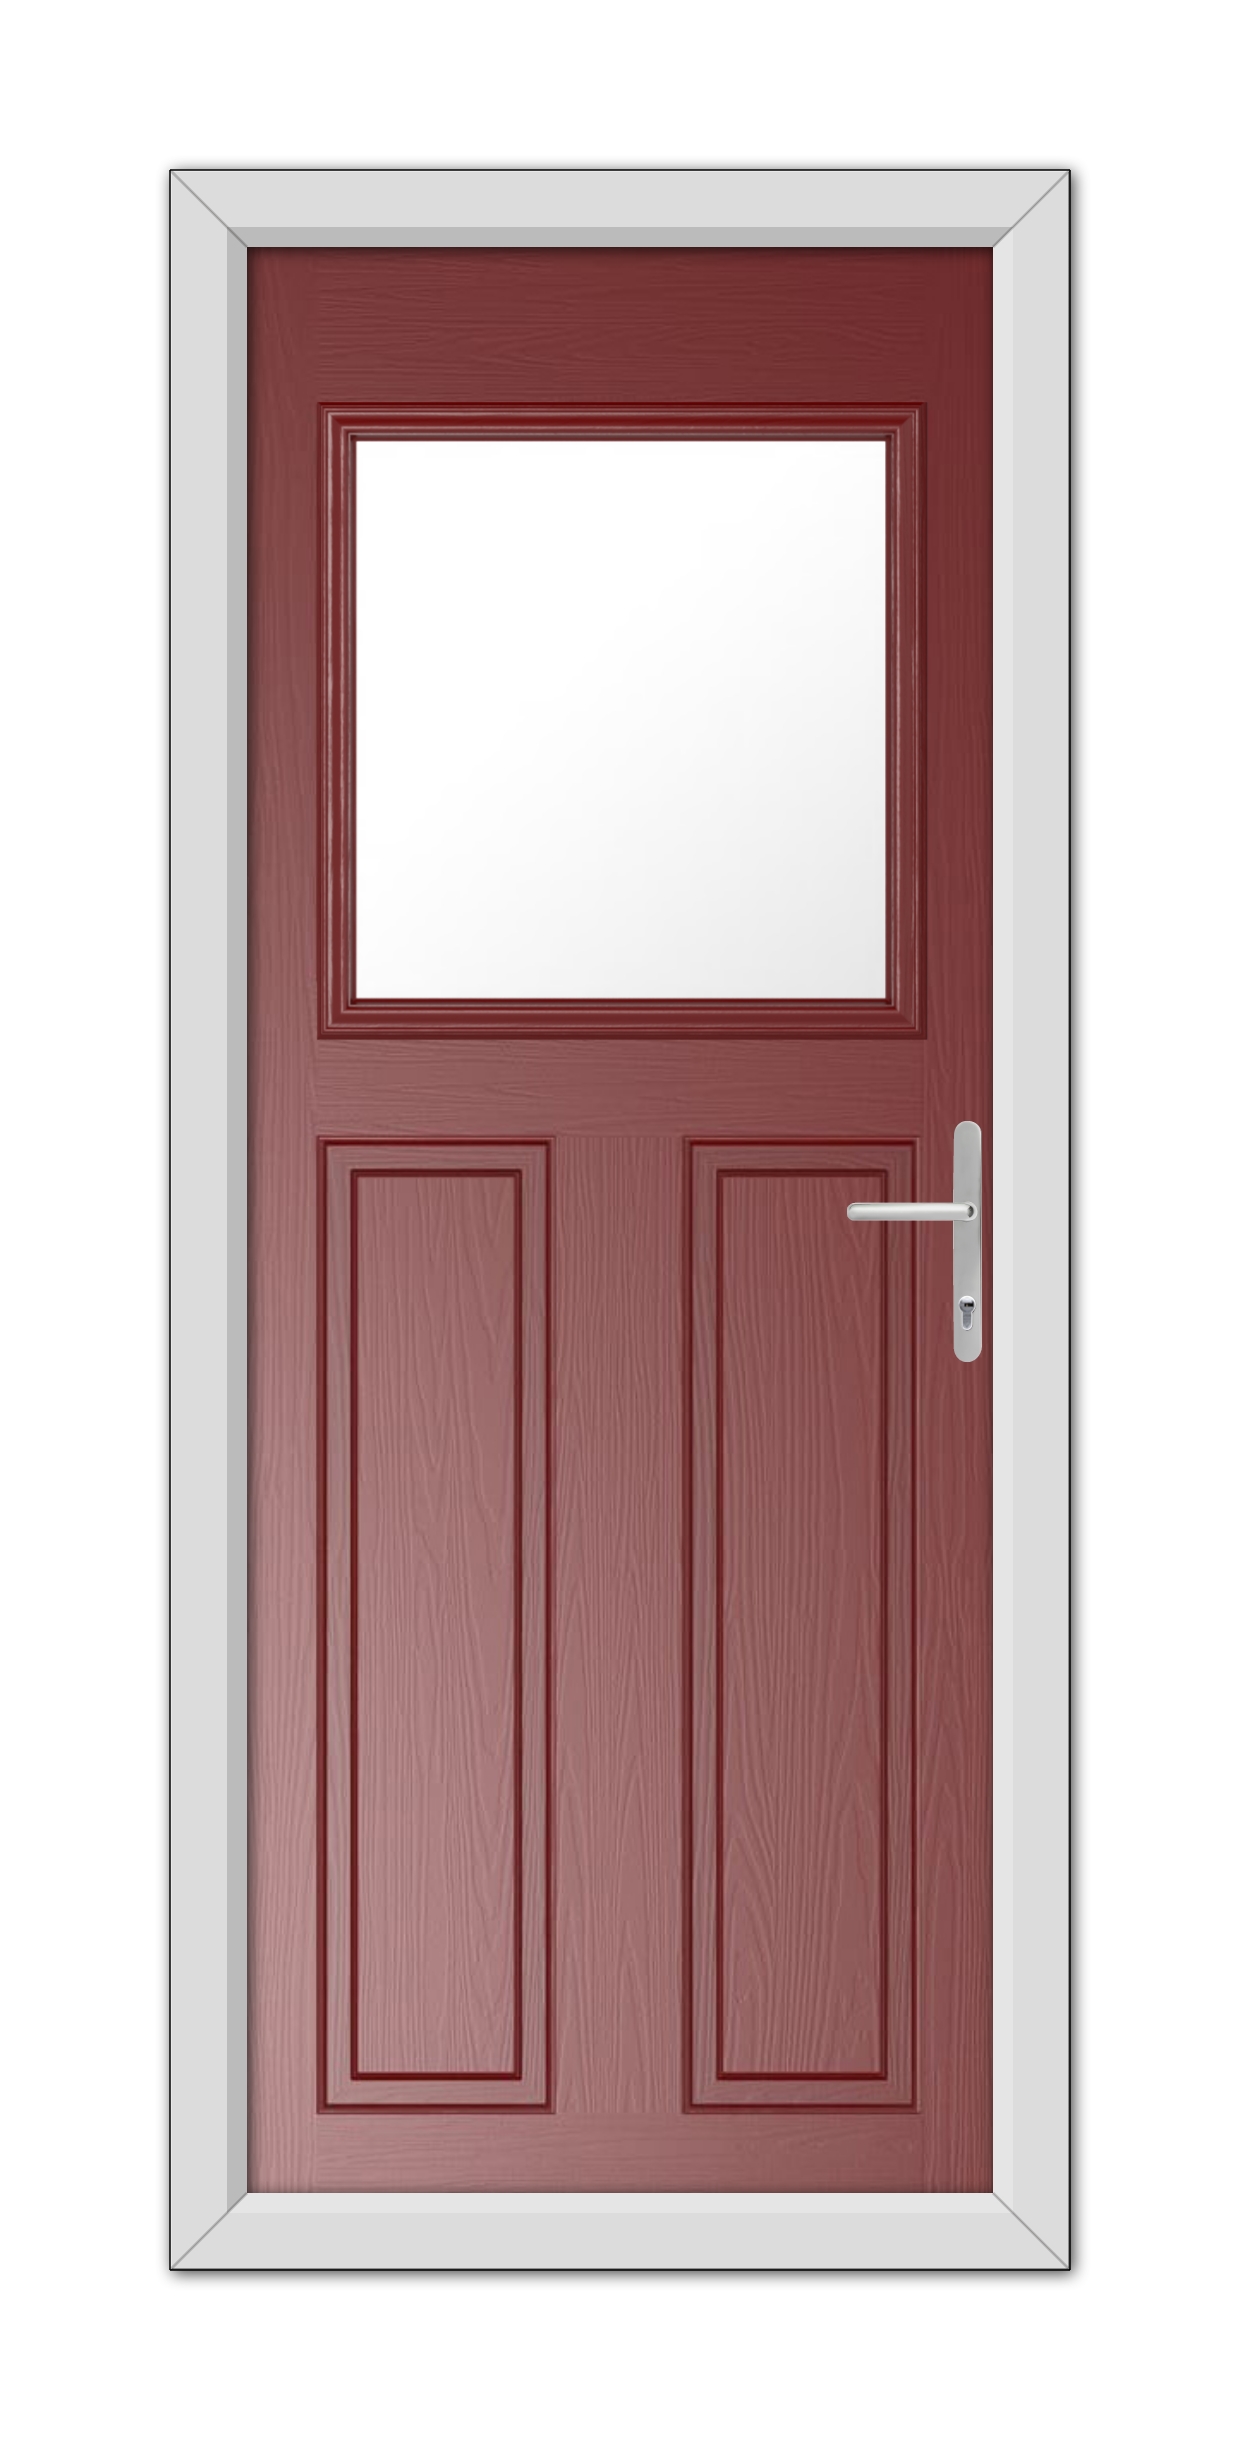 A Red Axwell Composite Door 48mm Timber Core with a small rectangular window at the top, set in a white frame, featuring a silver handle on the right side.